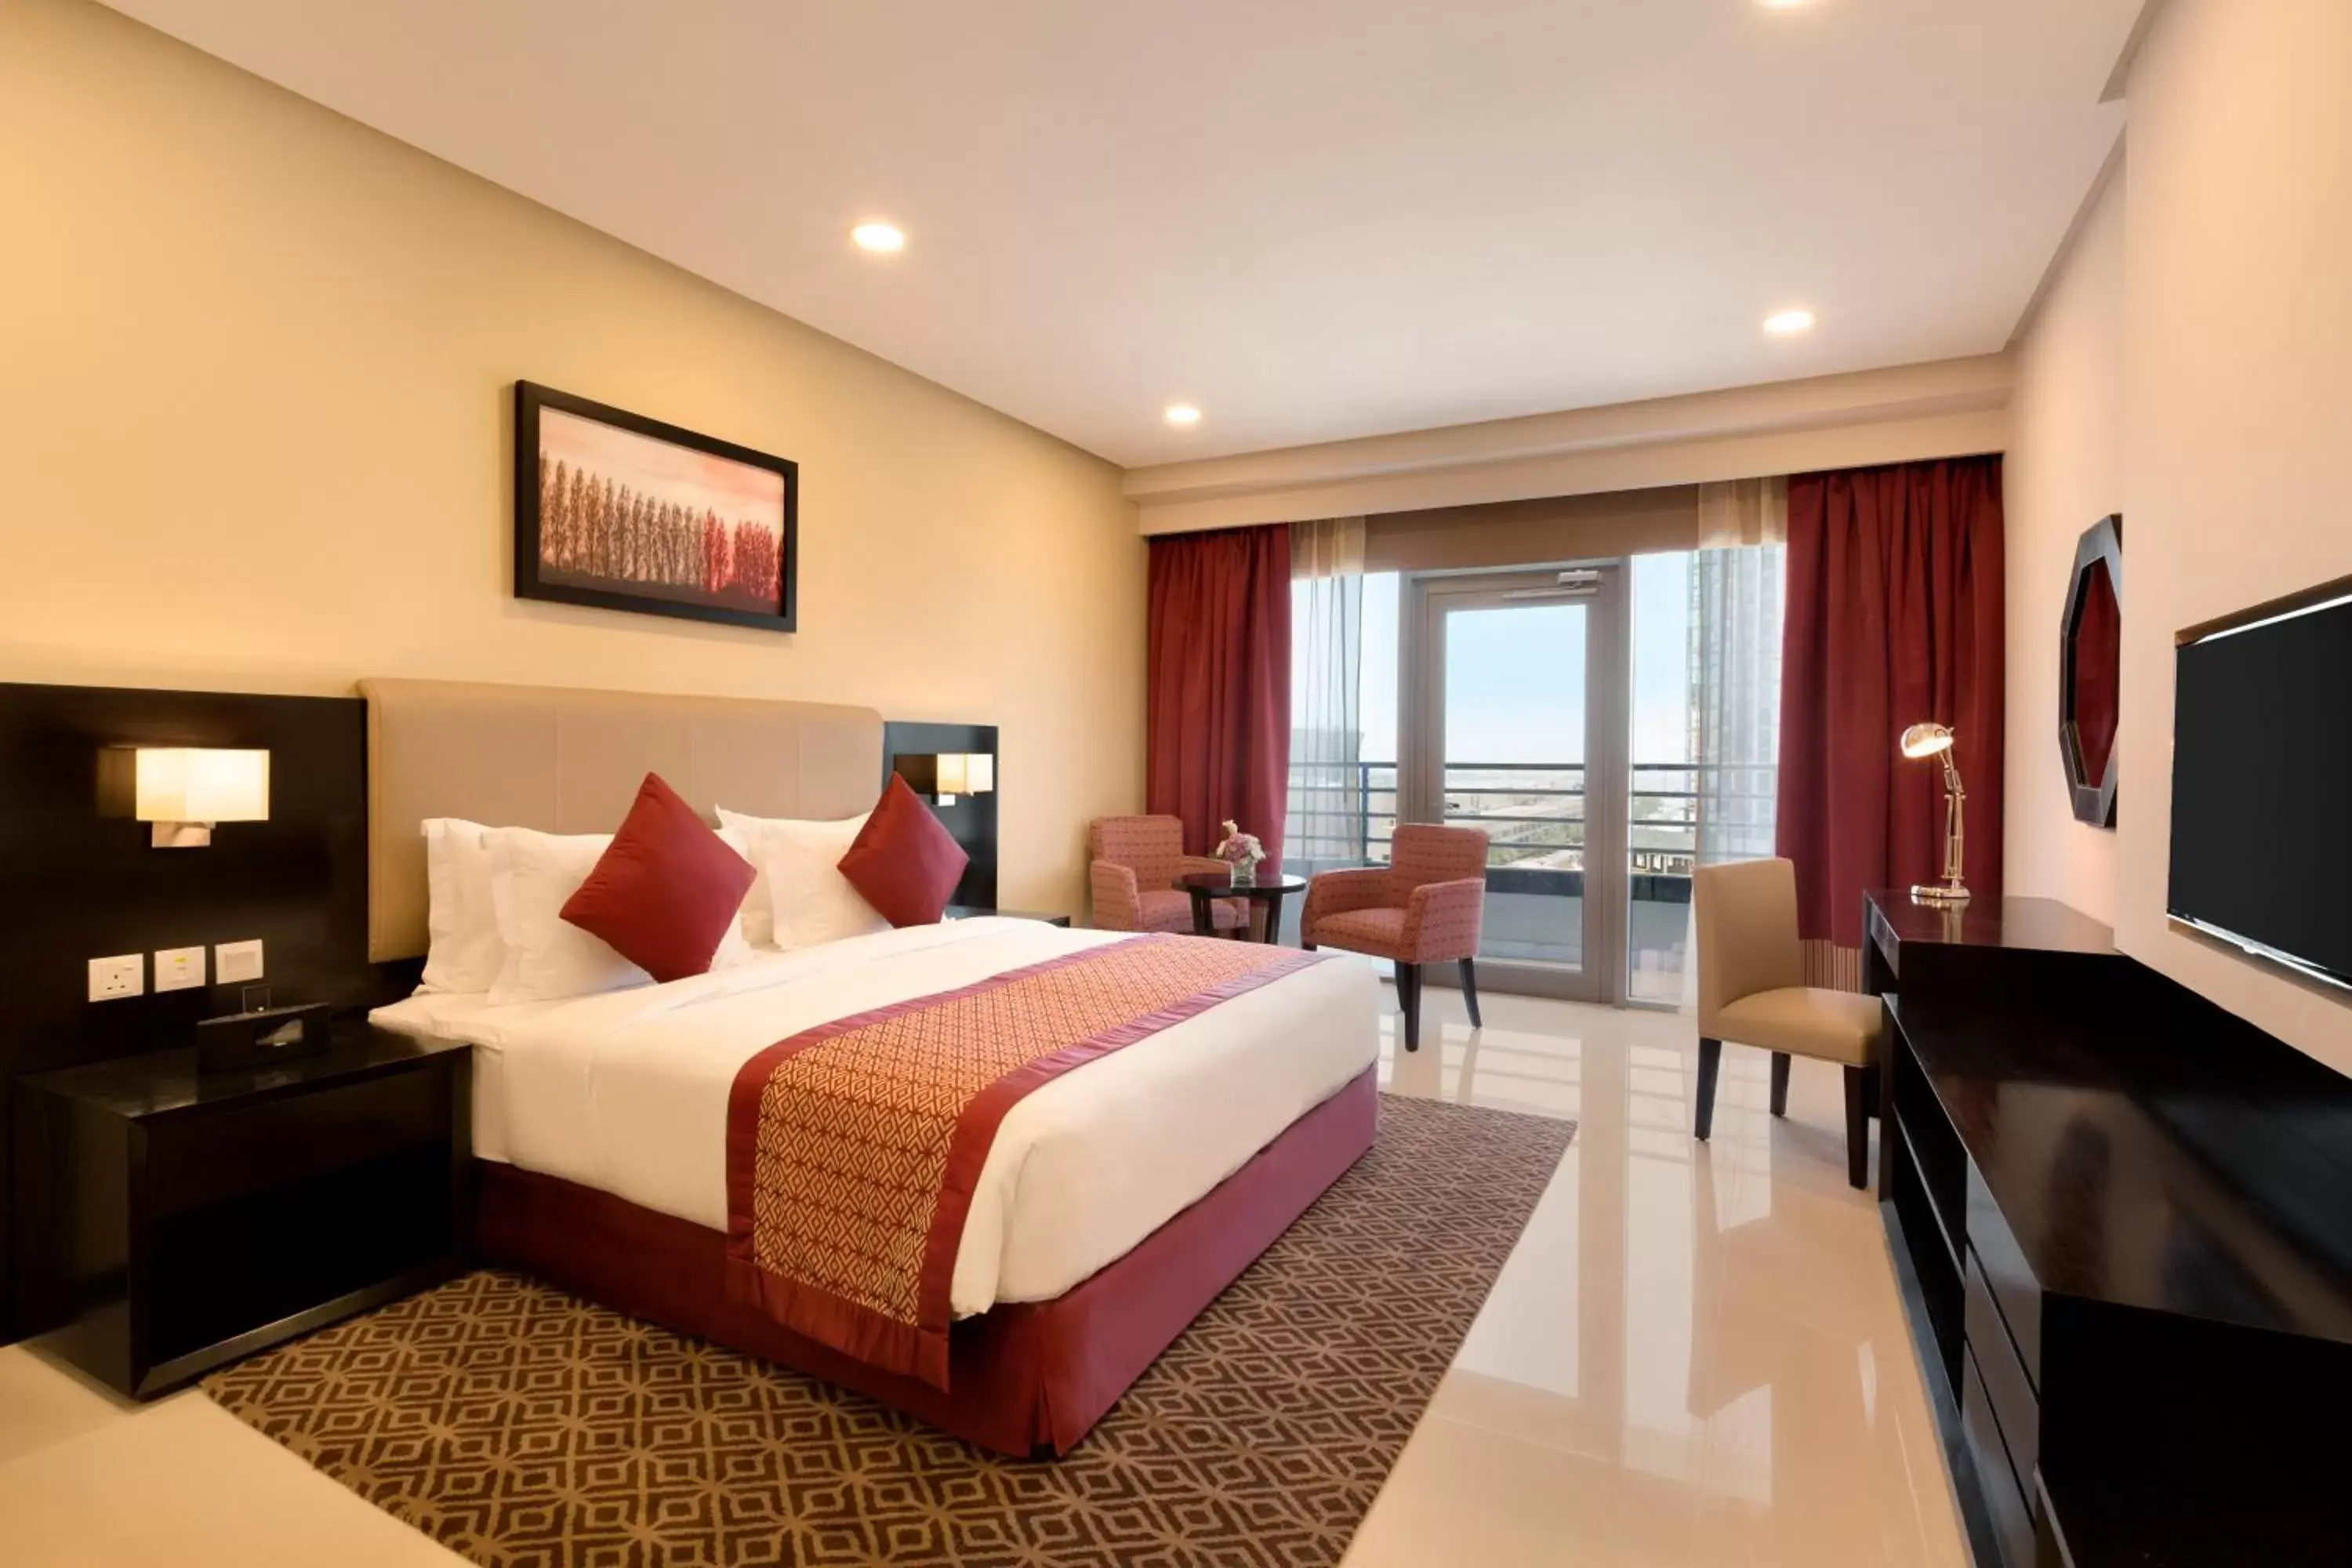 Bed, Room Photo in Ramada Hotel and Suites Amwaj Islands